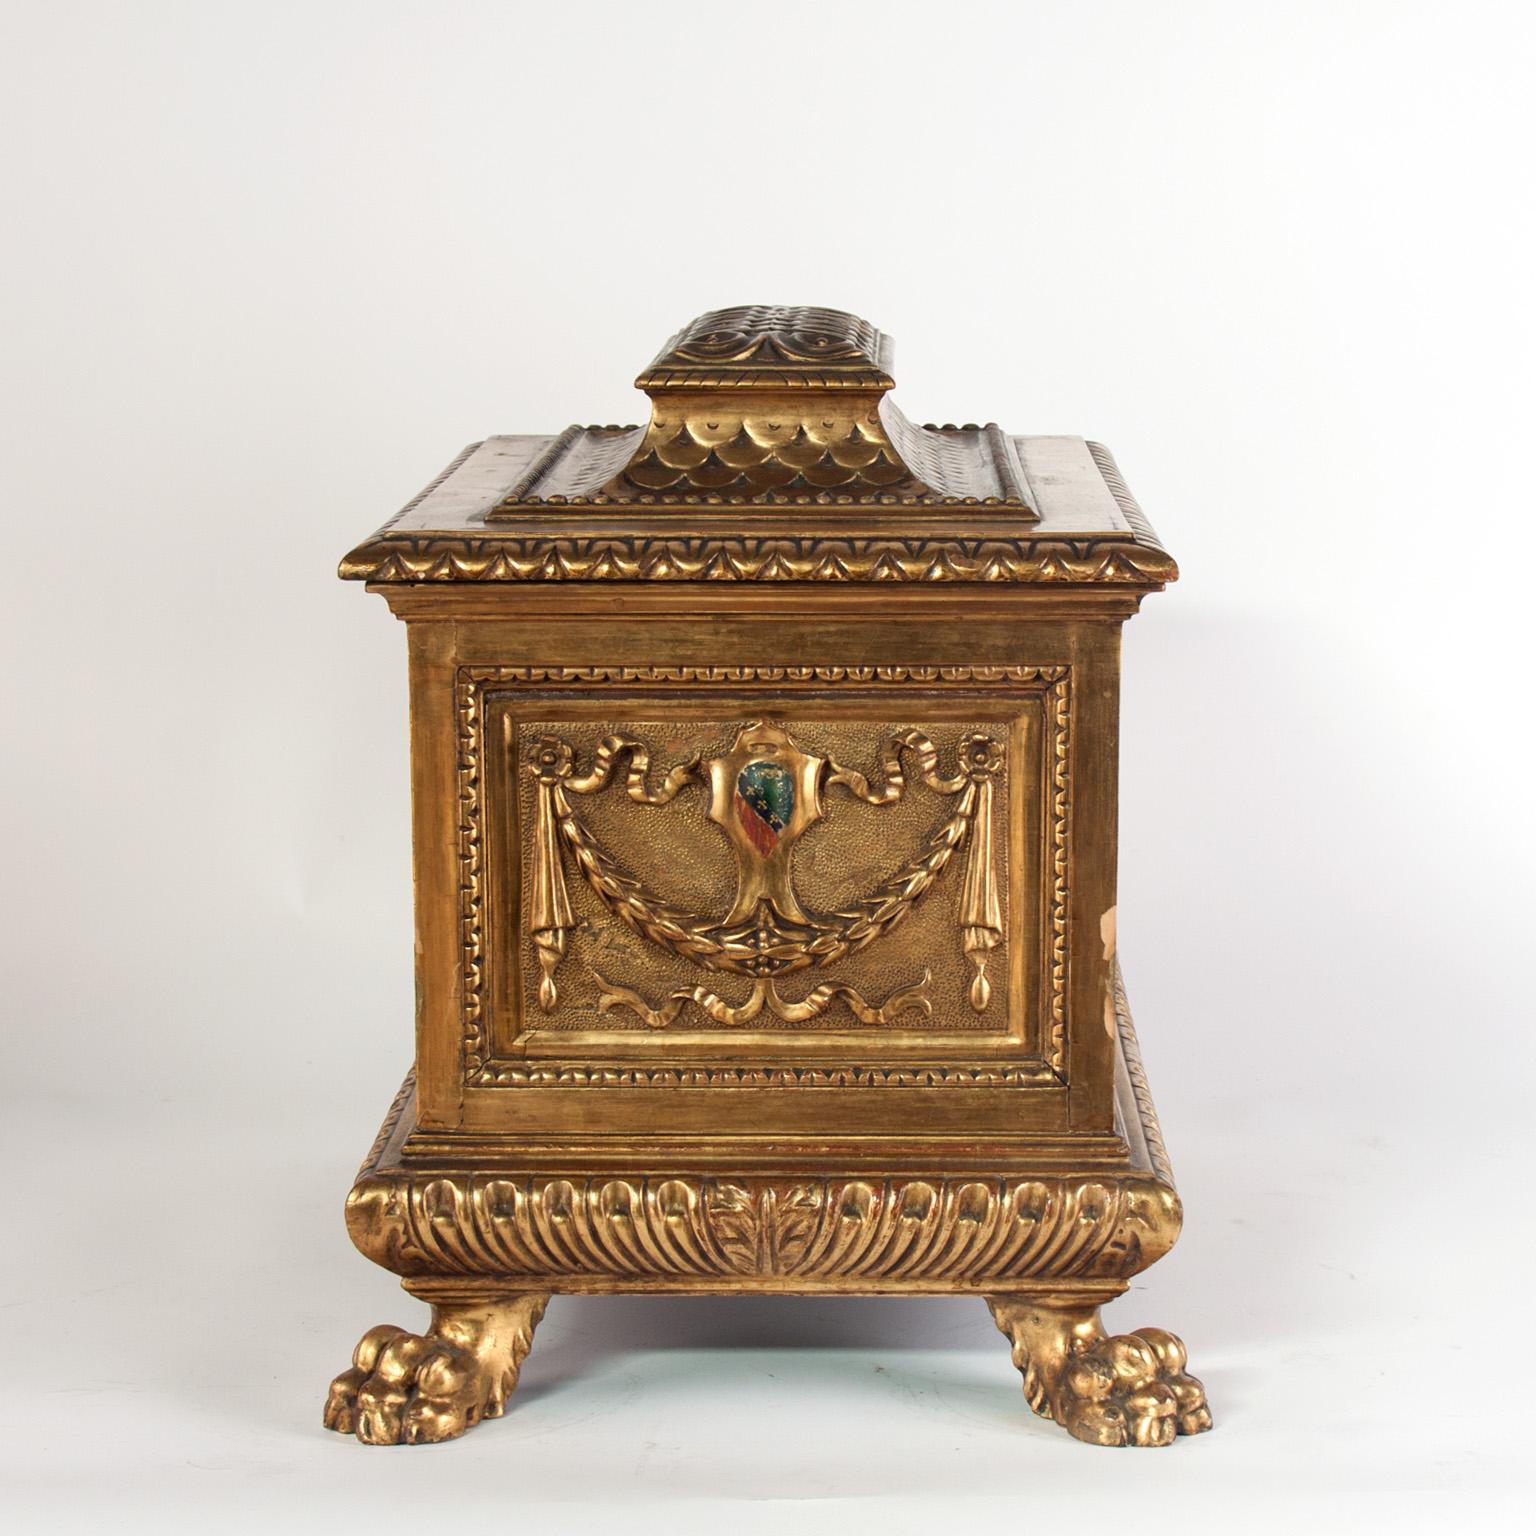 Patinated Italian 19th C. polychromed Wooden Casket. For Sale